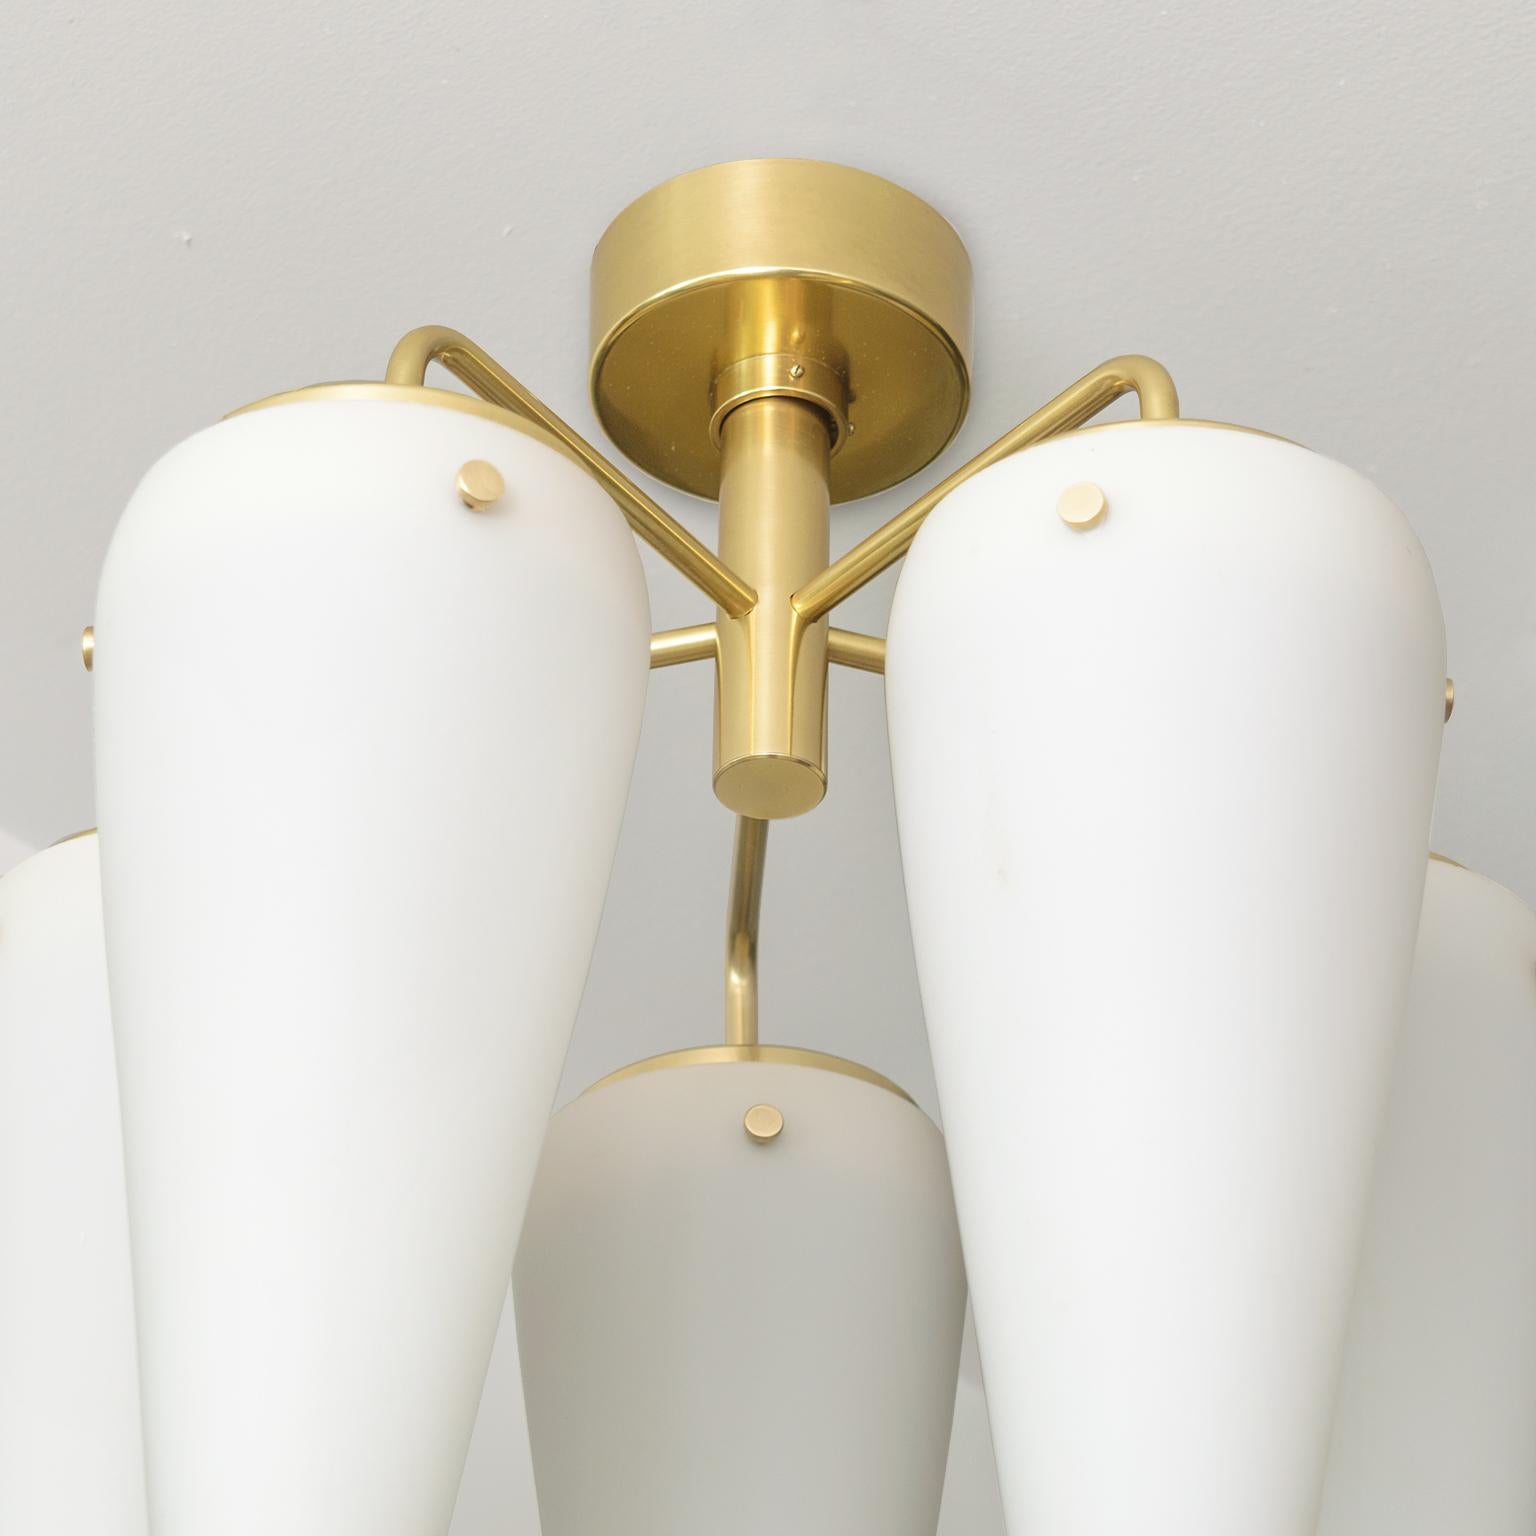 Hans-Agne Jacobsson 5 Opal Glass Shade Polished Brass Pendant by AWF, Norway In Good Condition For Sale In New York, NY